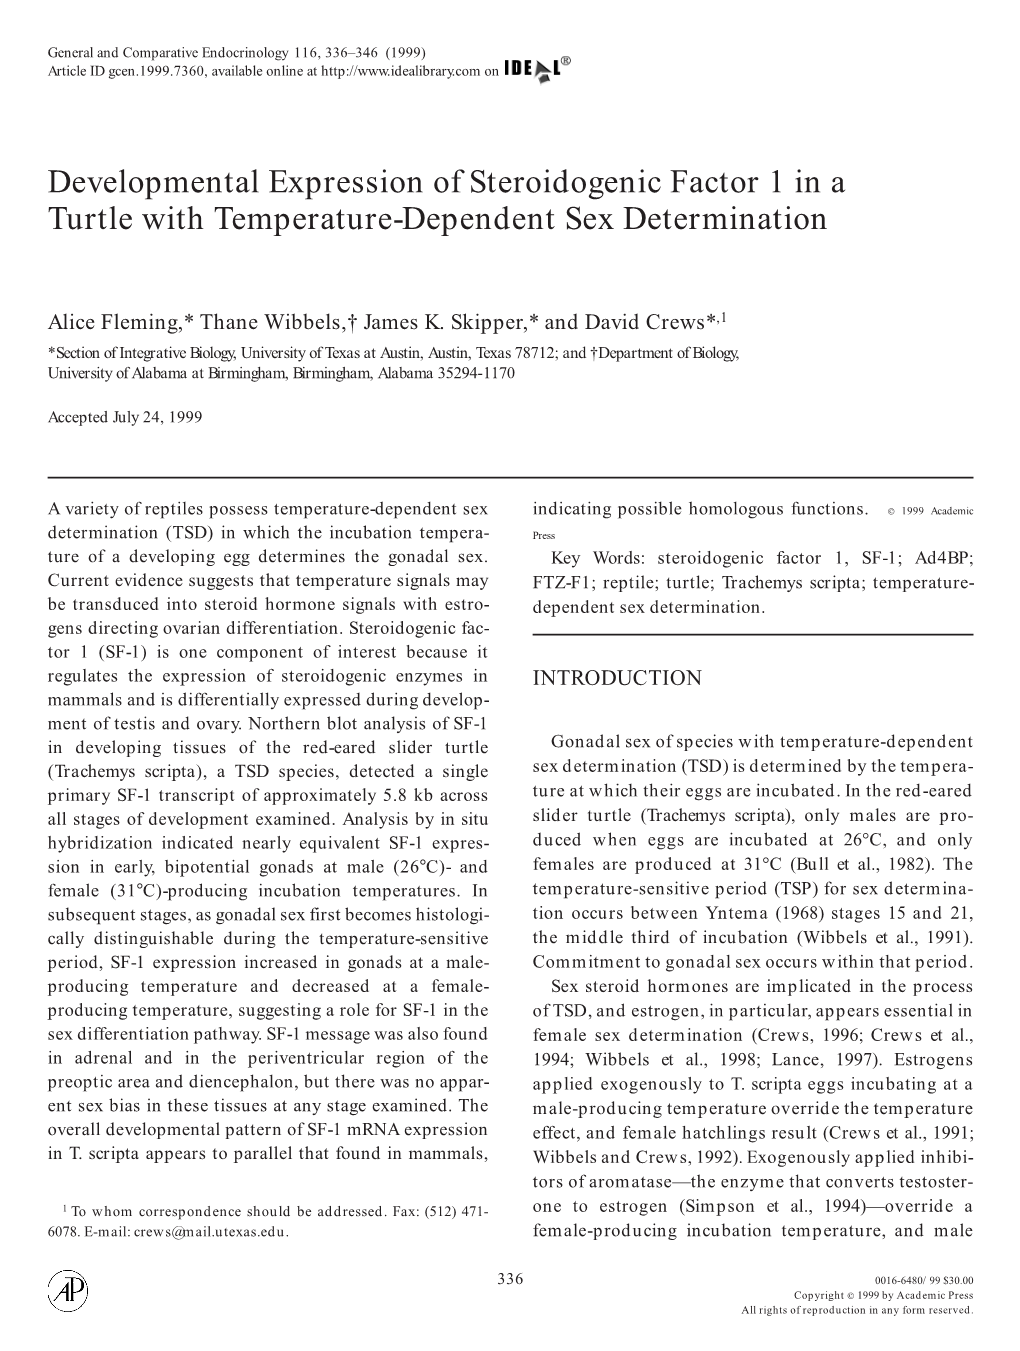 Developmental Expression of Steroidogenic Factor 1 in a Turtle with Temperature-Dependent Sex Determination